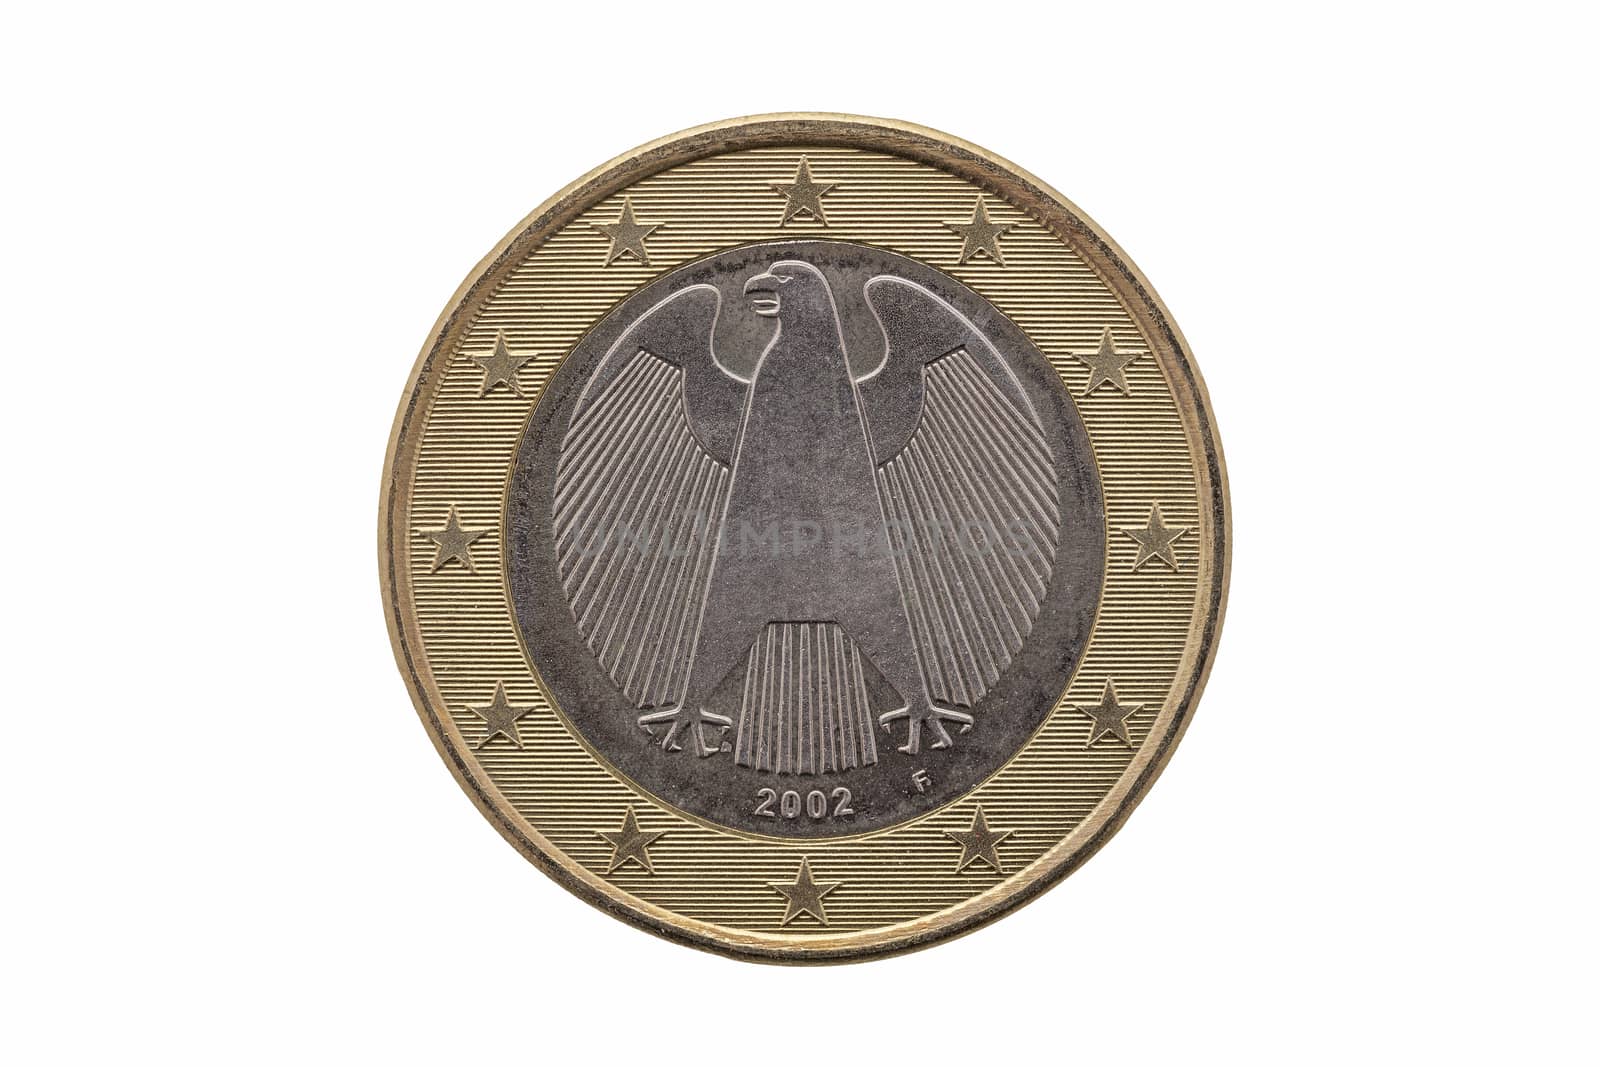 Reverse side of a One Euro coin of Germany dated 2002 which shows the German eagle cut out and isolated on a white background